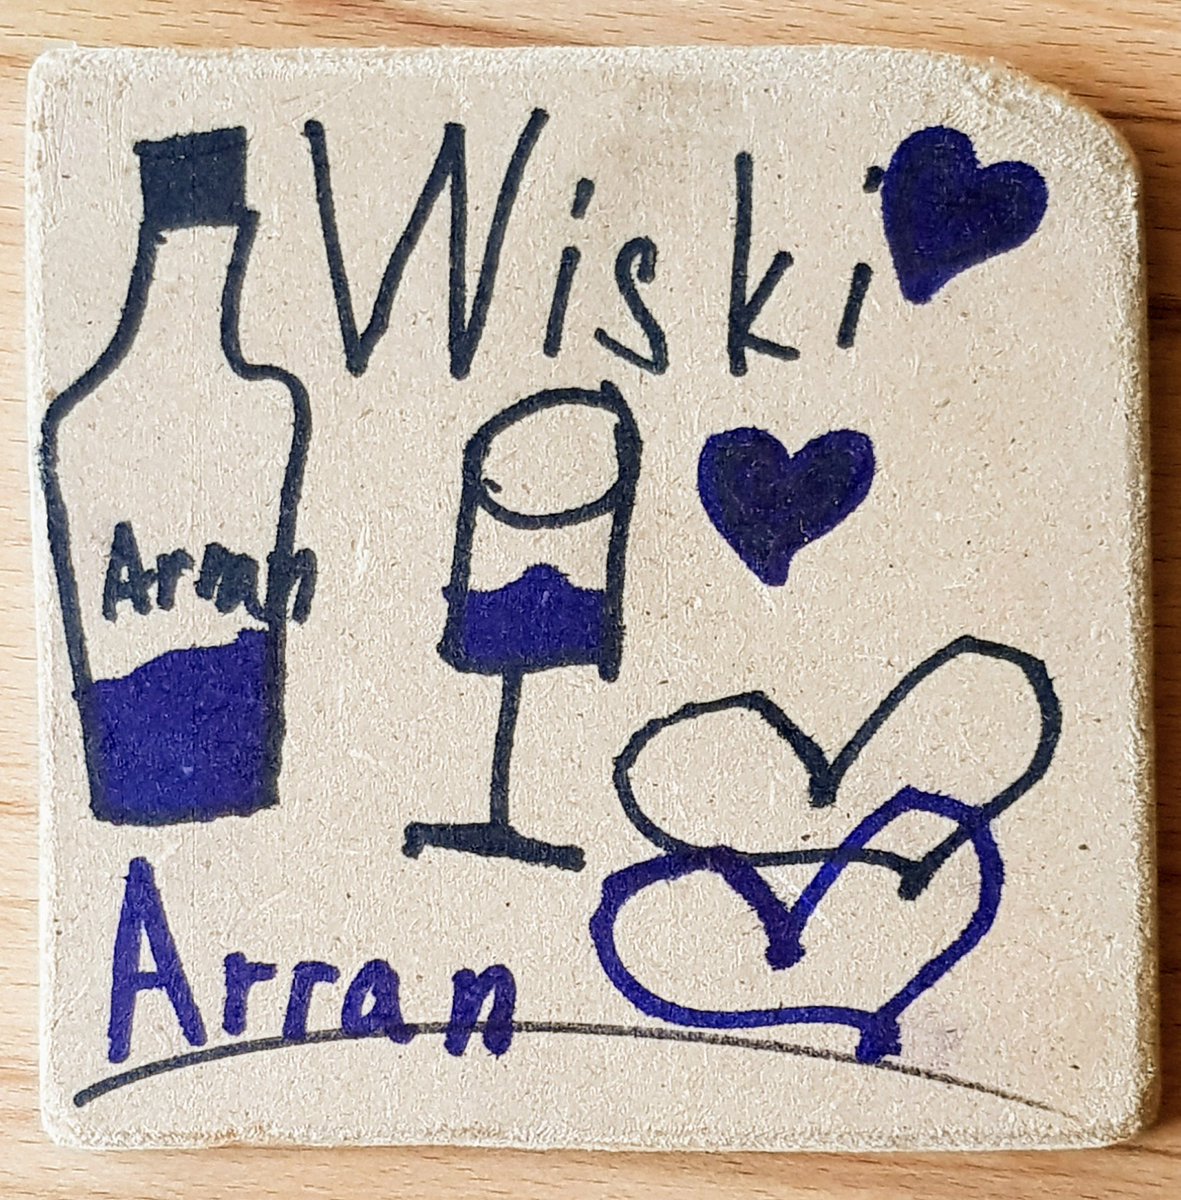 While working in the shed earlier today, my daughter (8) decided she wanted to make a coaster for my whisky tastings. She sure knows her dads favourite 😍 @Arranwhisky